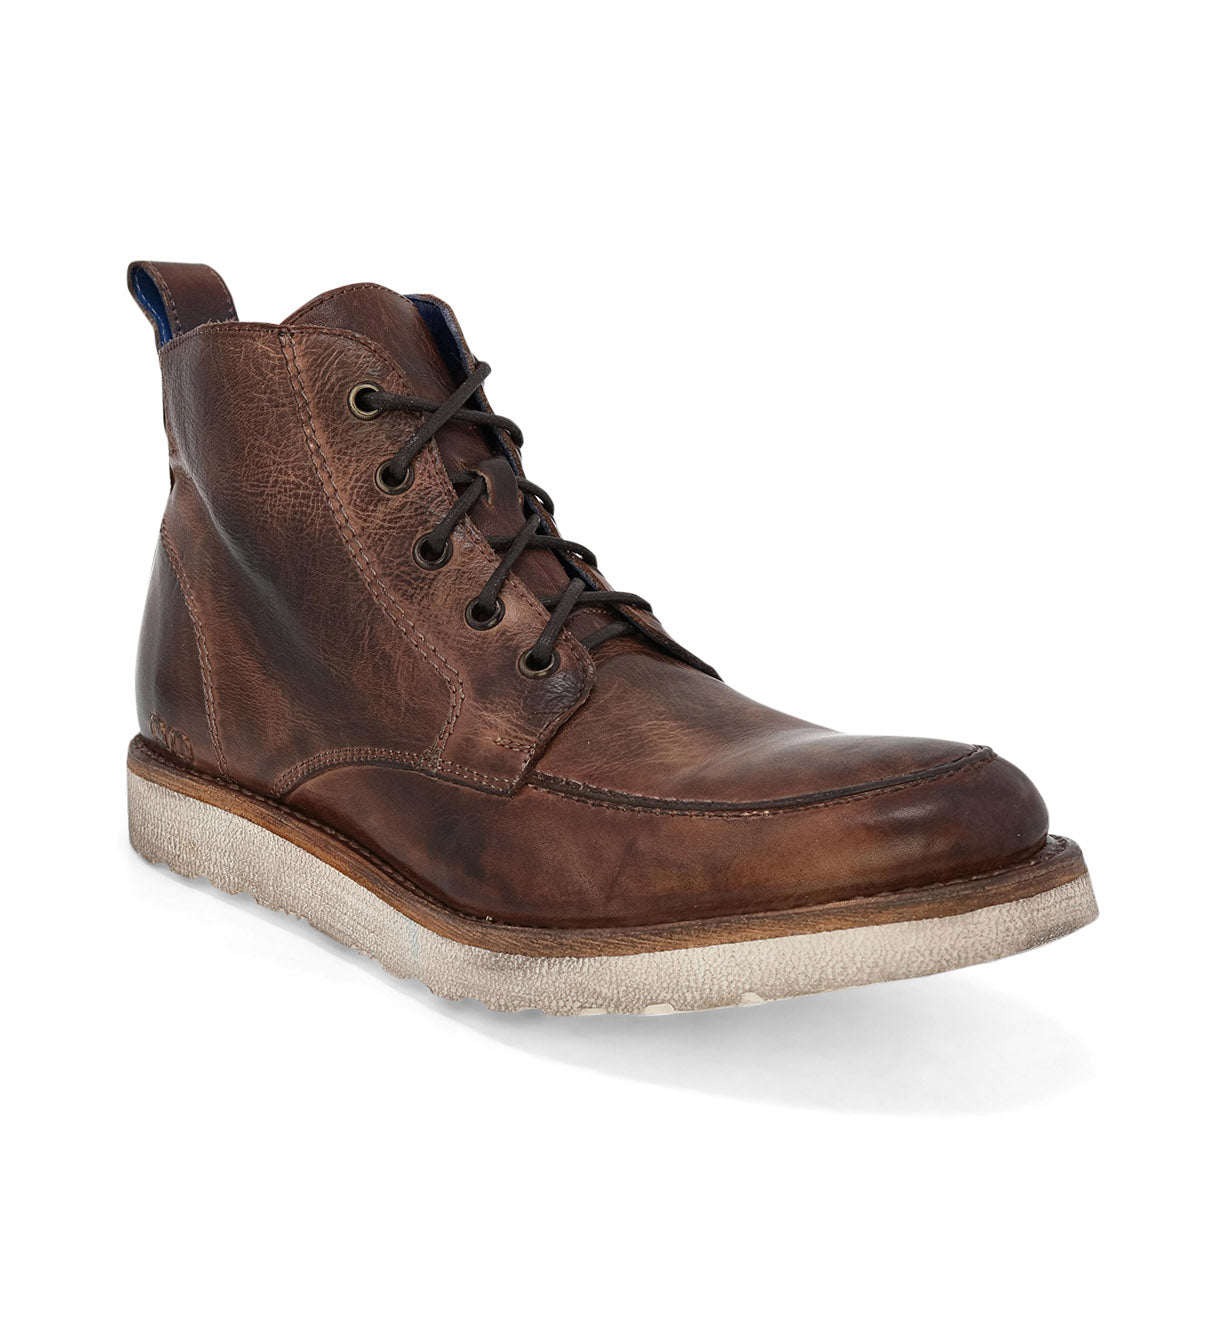 Men's Lincoln Black Lux Boot by Bed Stu with laces and a light-colored sole, displayed against a white background.